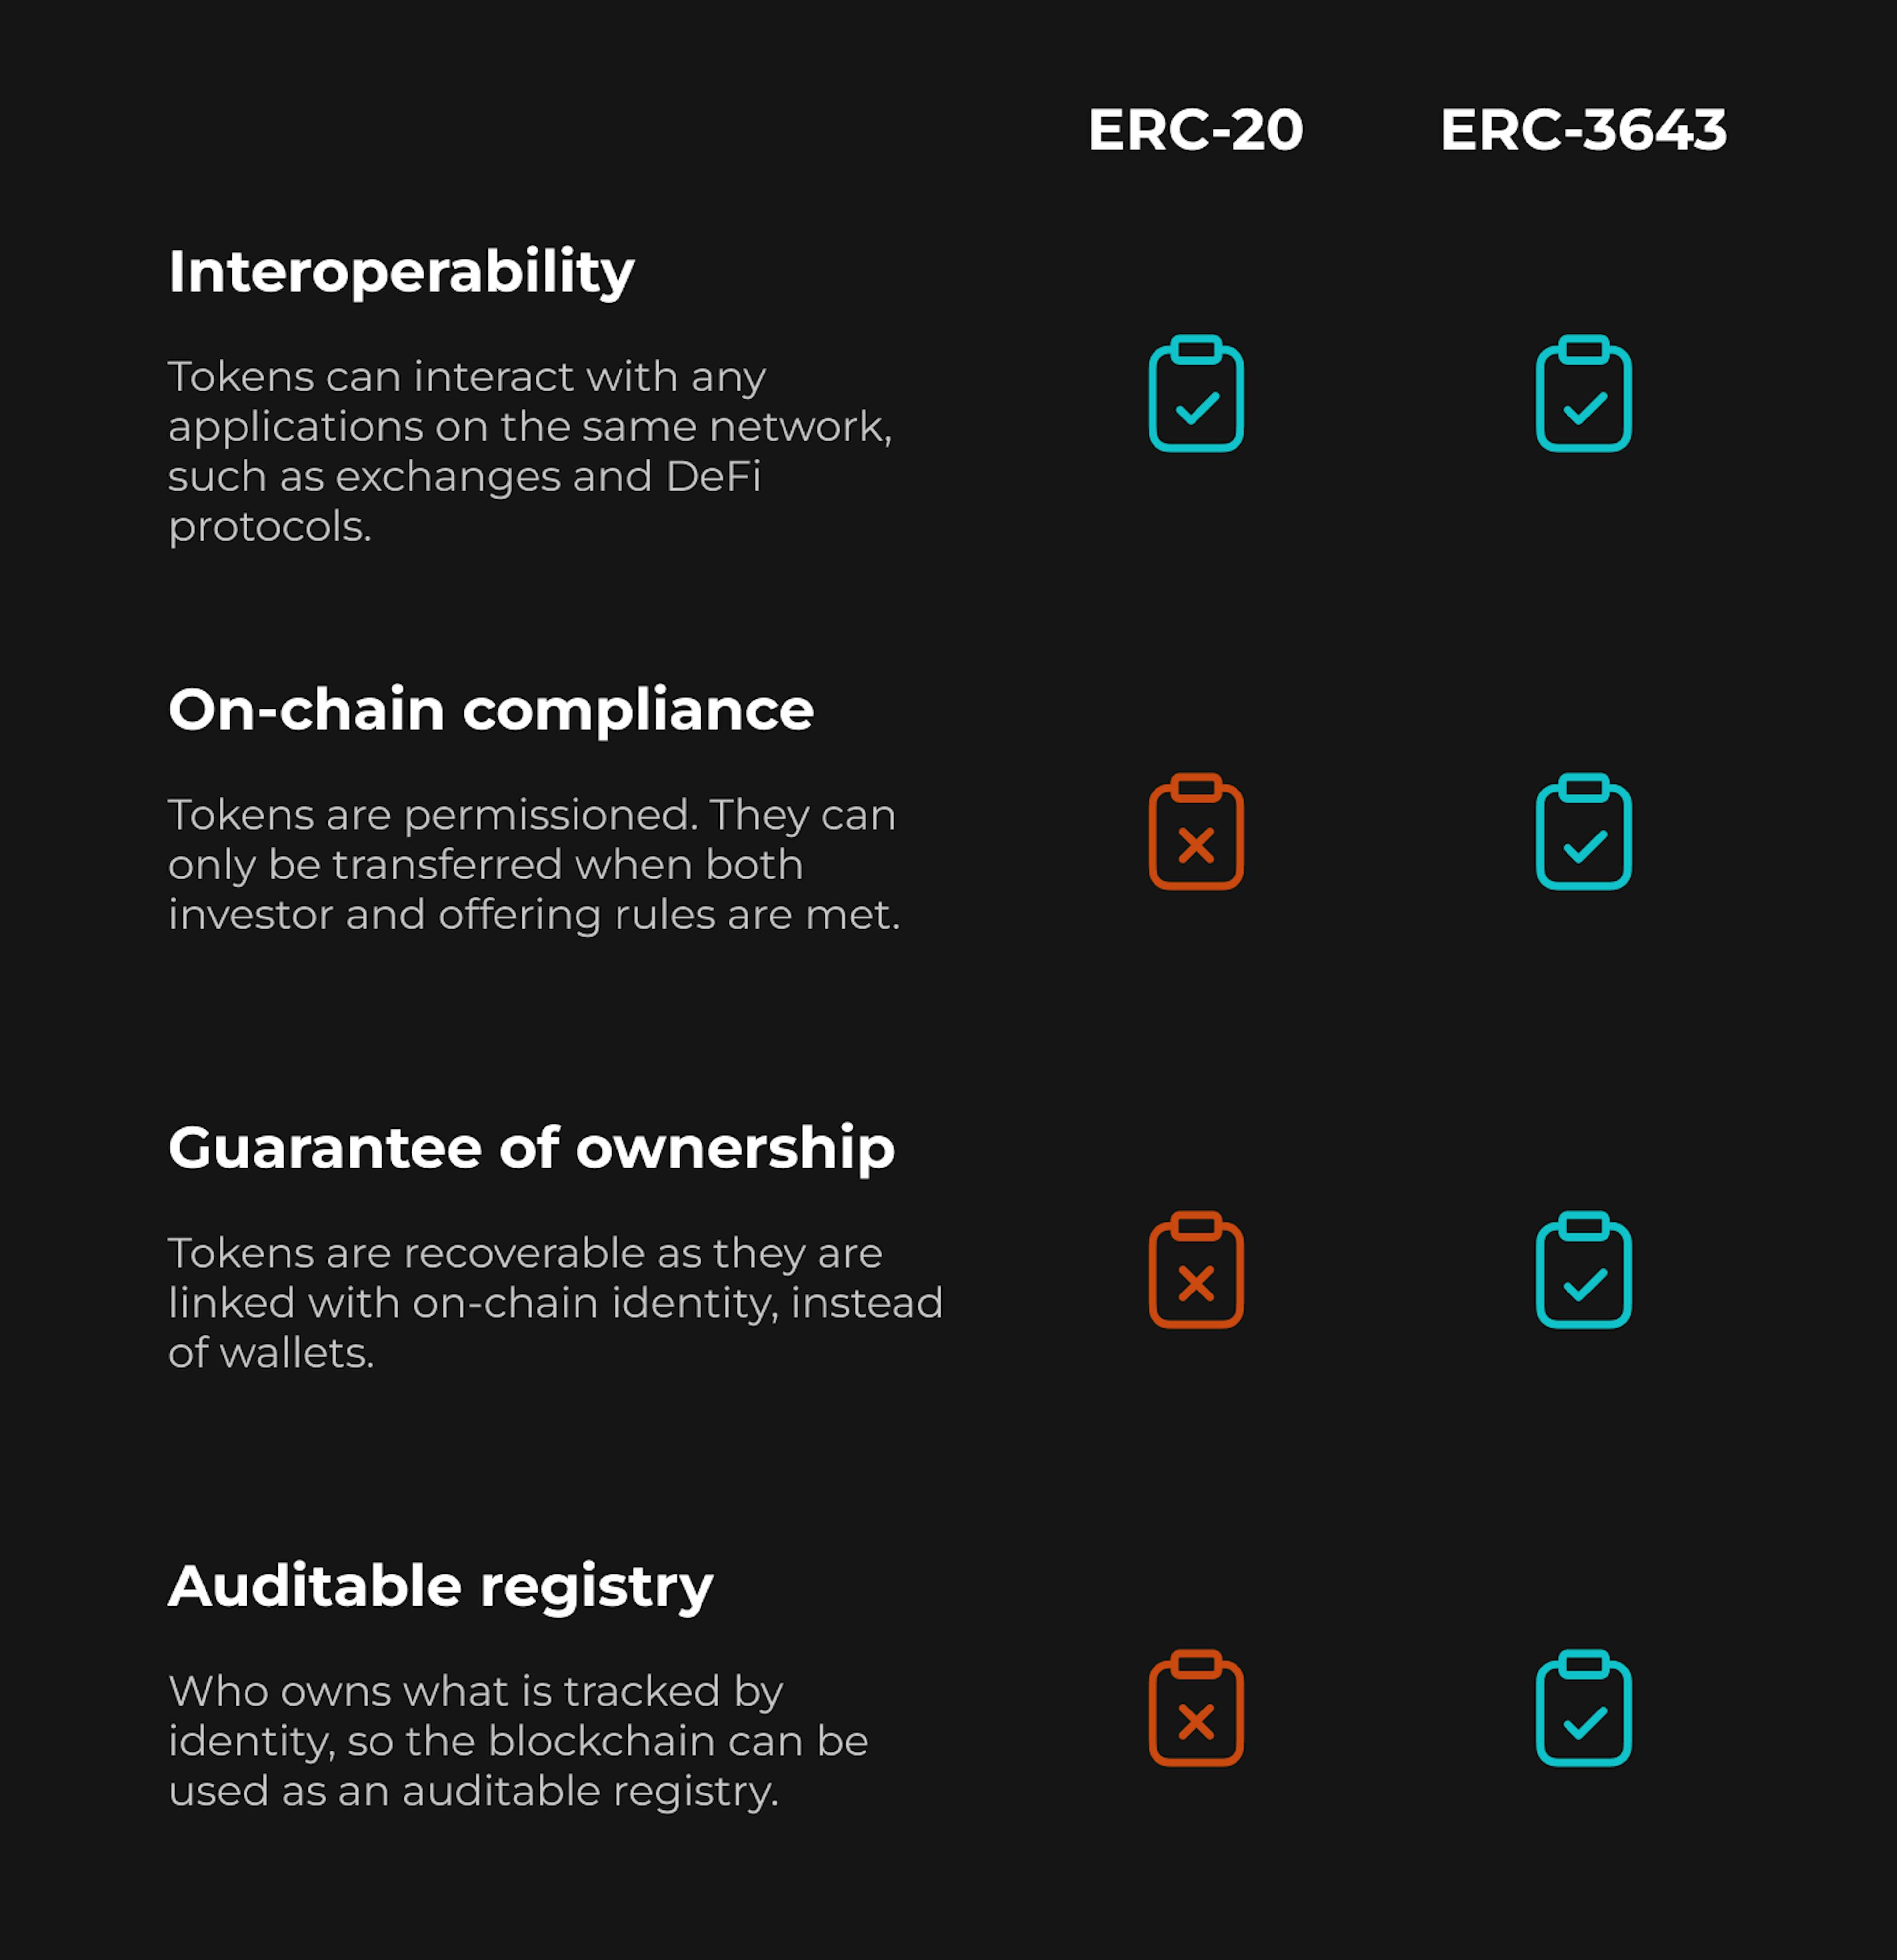 Differences of the ERC-3643 standard from ERC-20